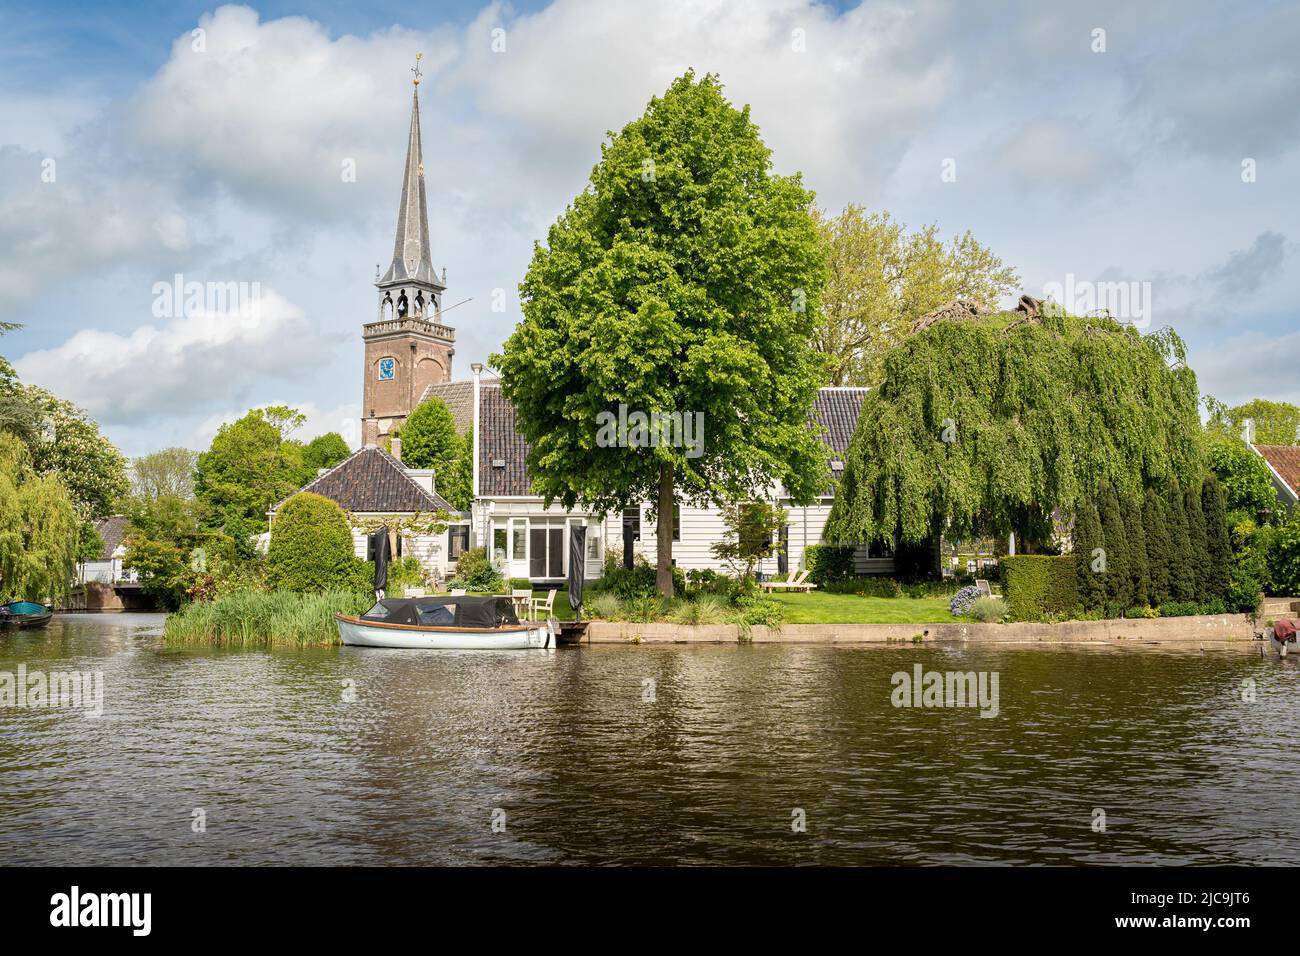 Picturesque dutch tourist village Broek in Waterland seen from the boat Stock Photo